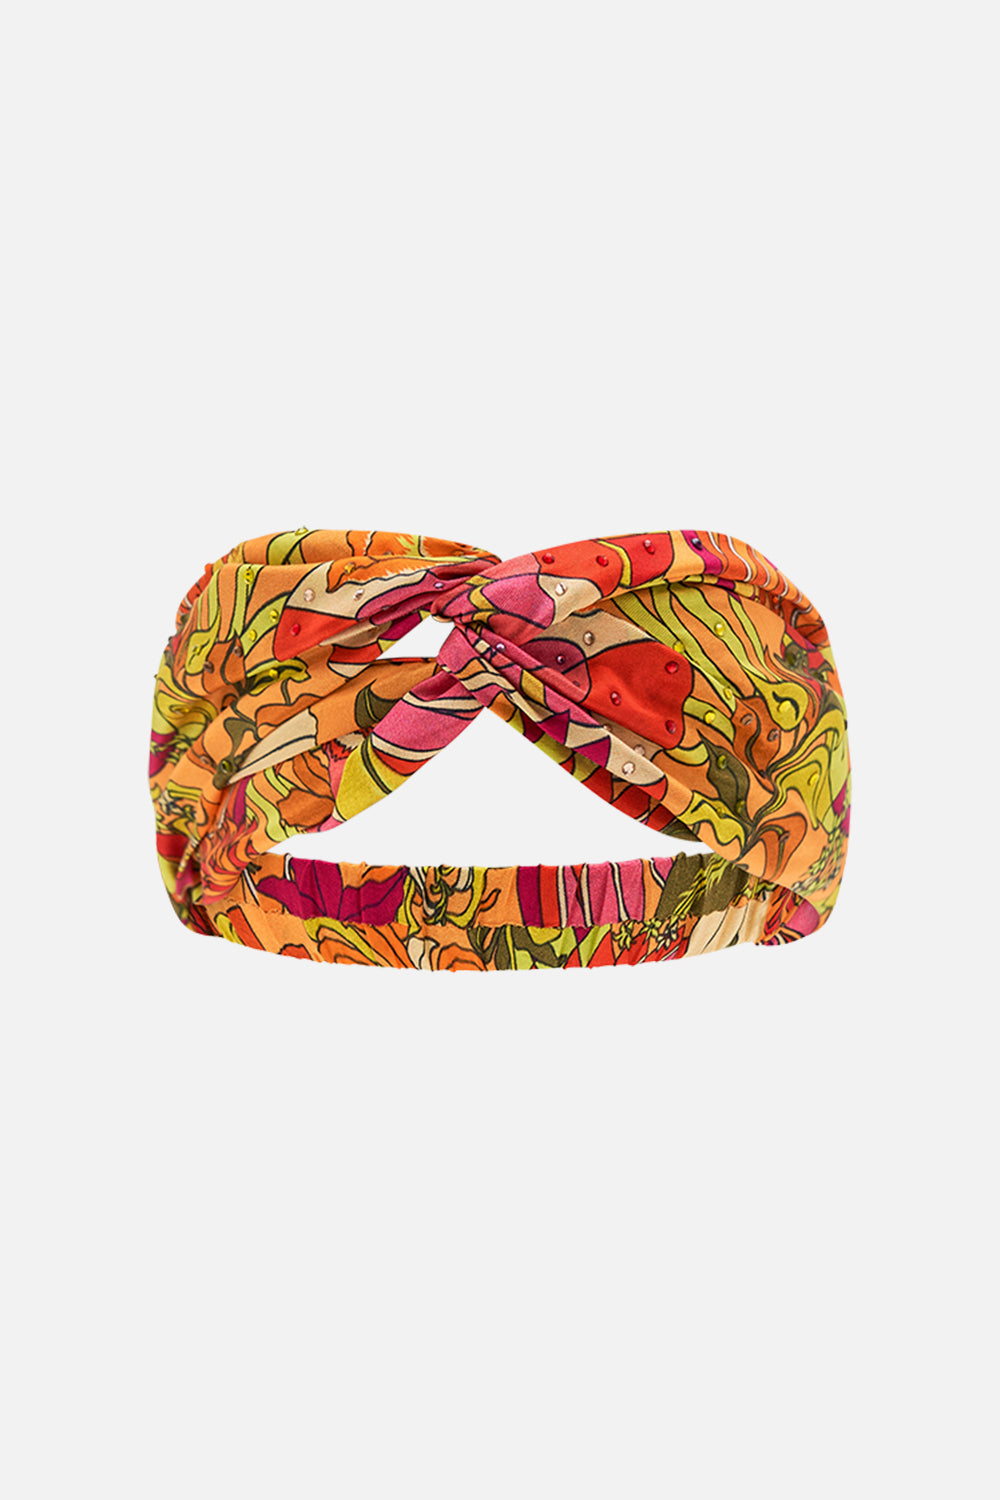 CAMILLA floral woven twist headband in The Flower Child Society